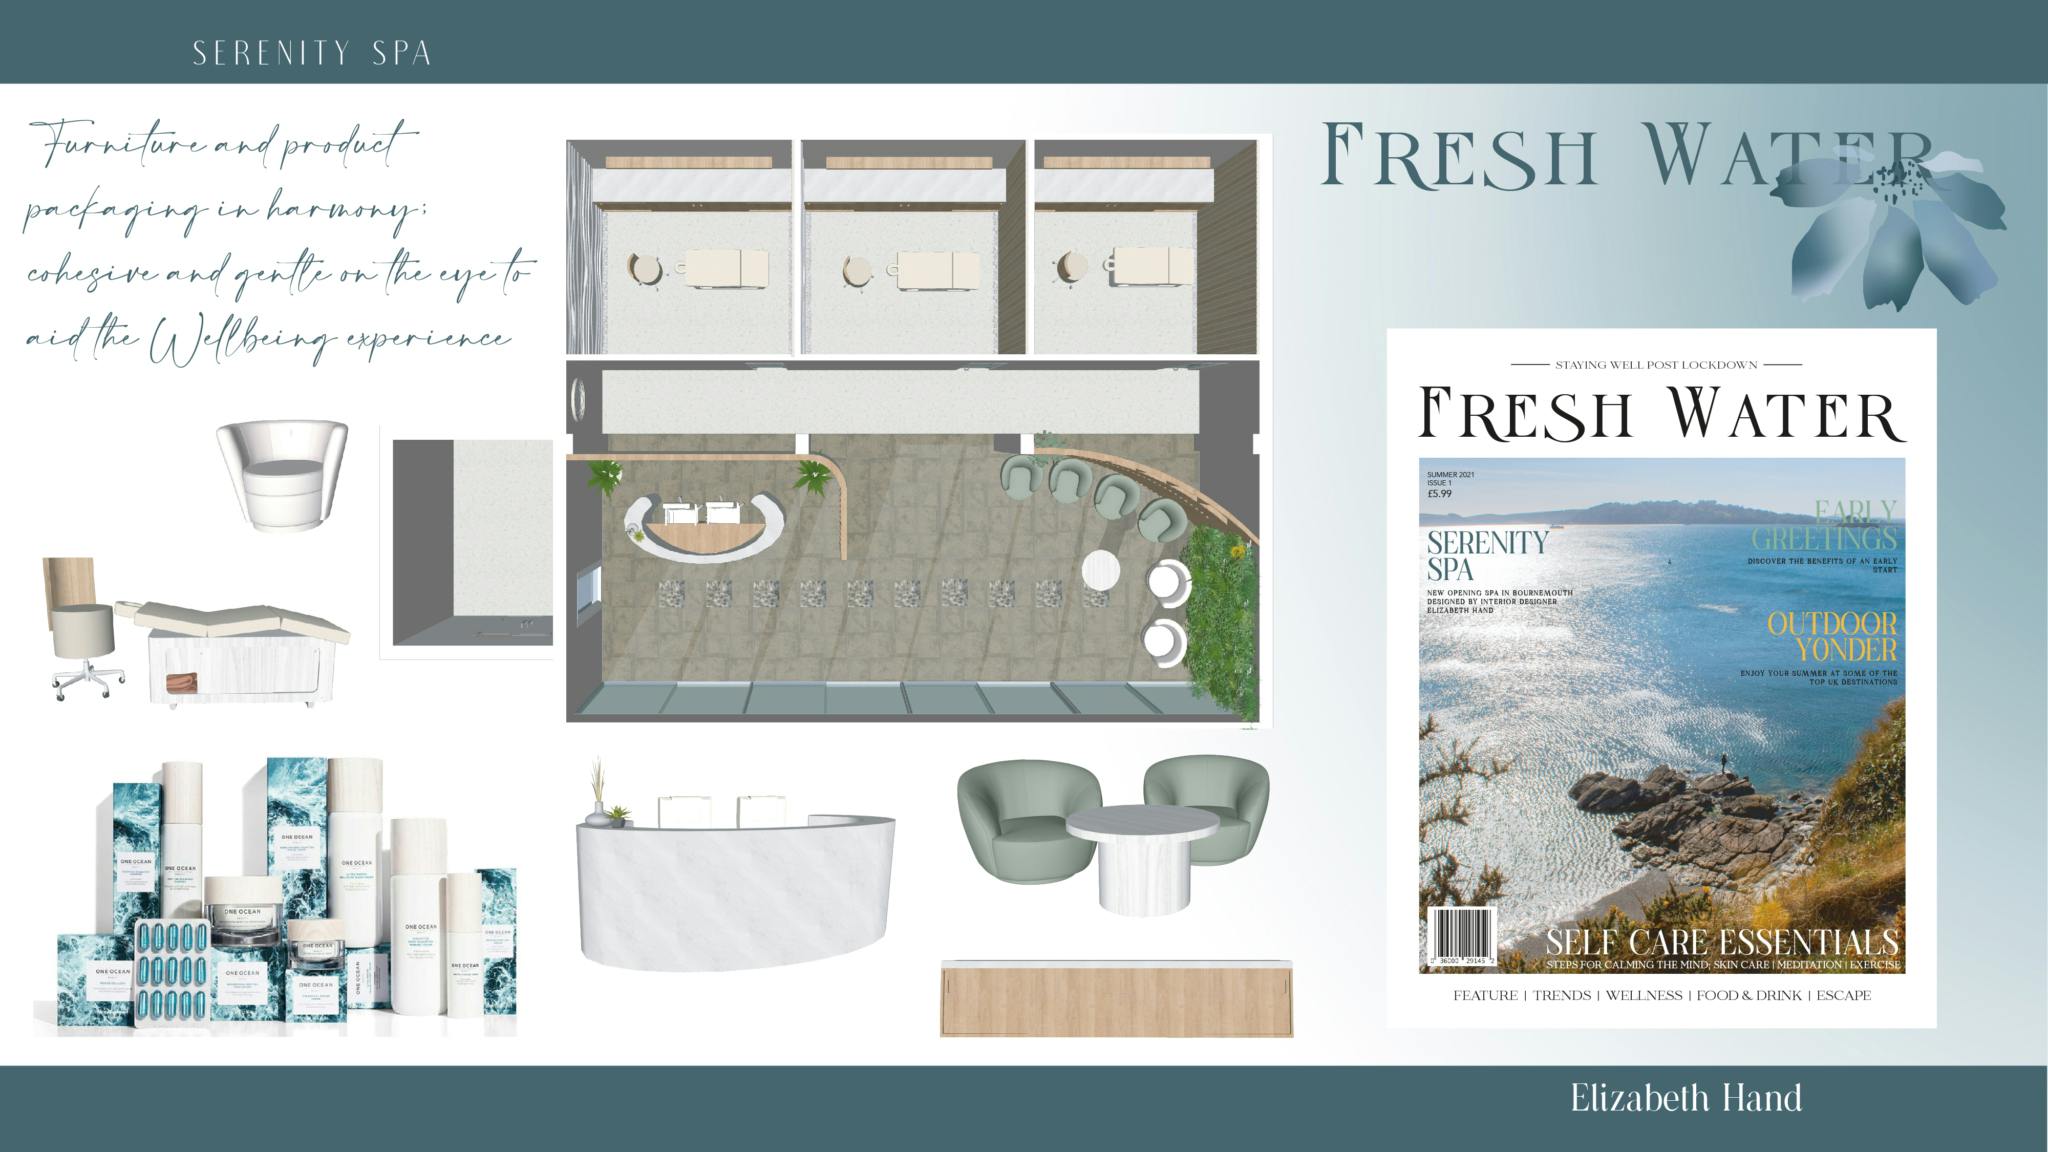 Plymouth College of Art graduating Interiors student Lizzy Hand's mood board for final major project featuring Serenity Spa and Fresh Water Magazine concepts, with blue and green muted colours, product shots and a spa floor plan